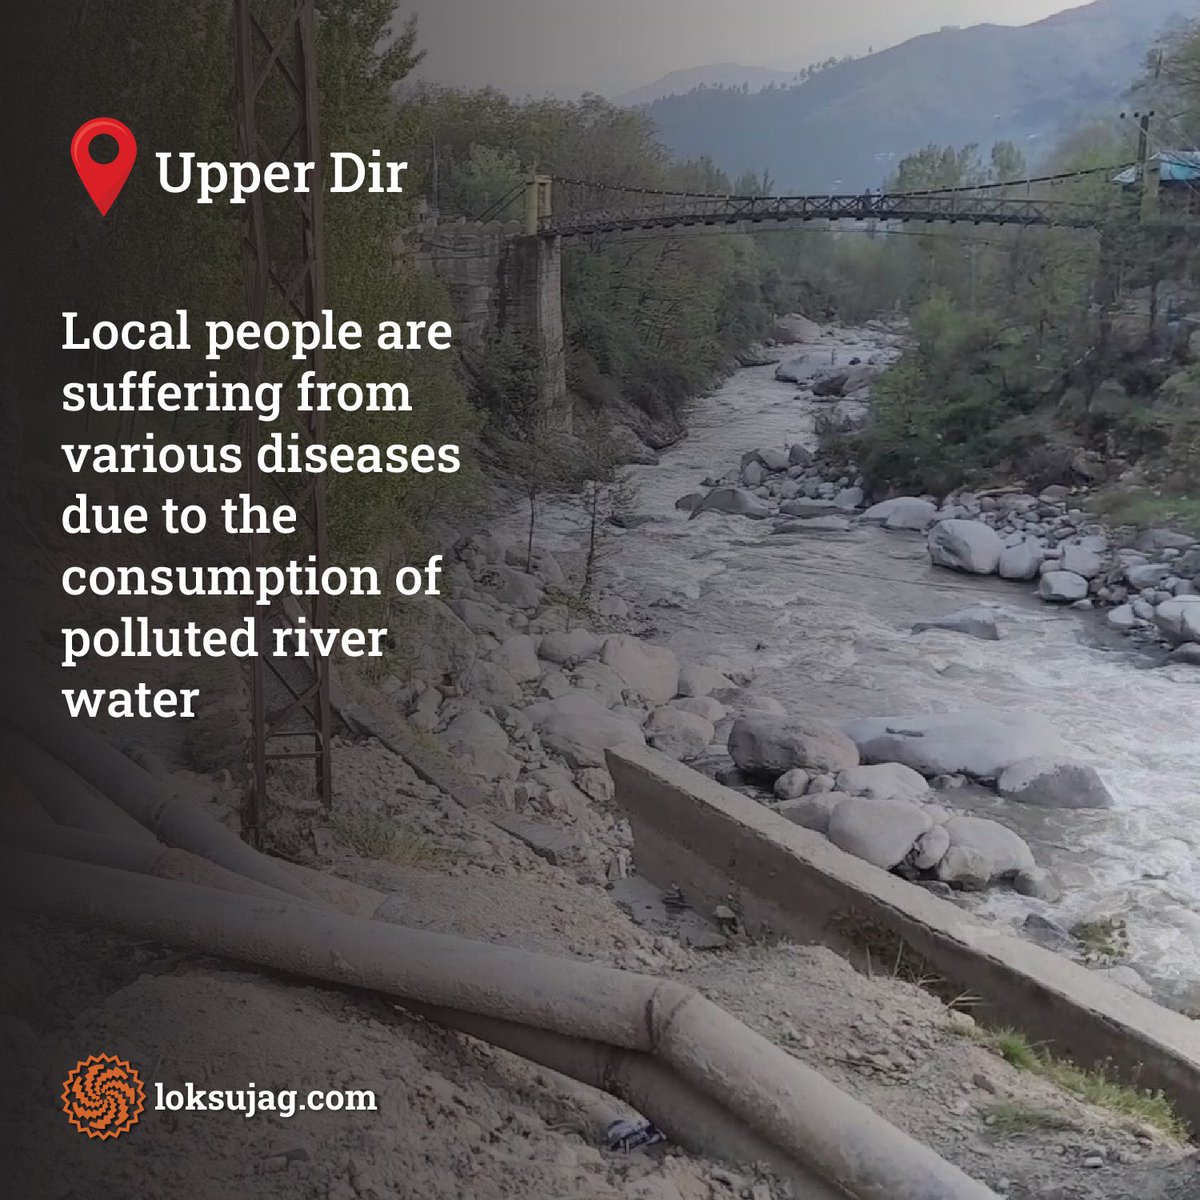 People of #UpperDir are suffering from various diseases due to the consumption of sewage-contaminated water from River Panjkora. However, the Government seems reluctant to enforce laws and regulations to stop the dumping of sewage water into the river.

#PublicHealthCrisis #KPK